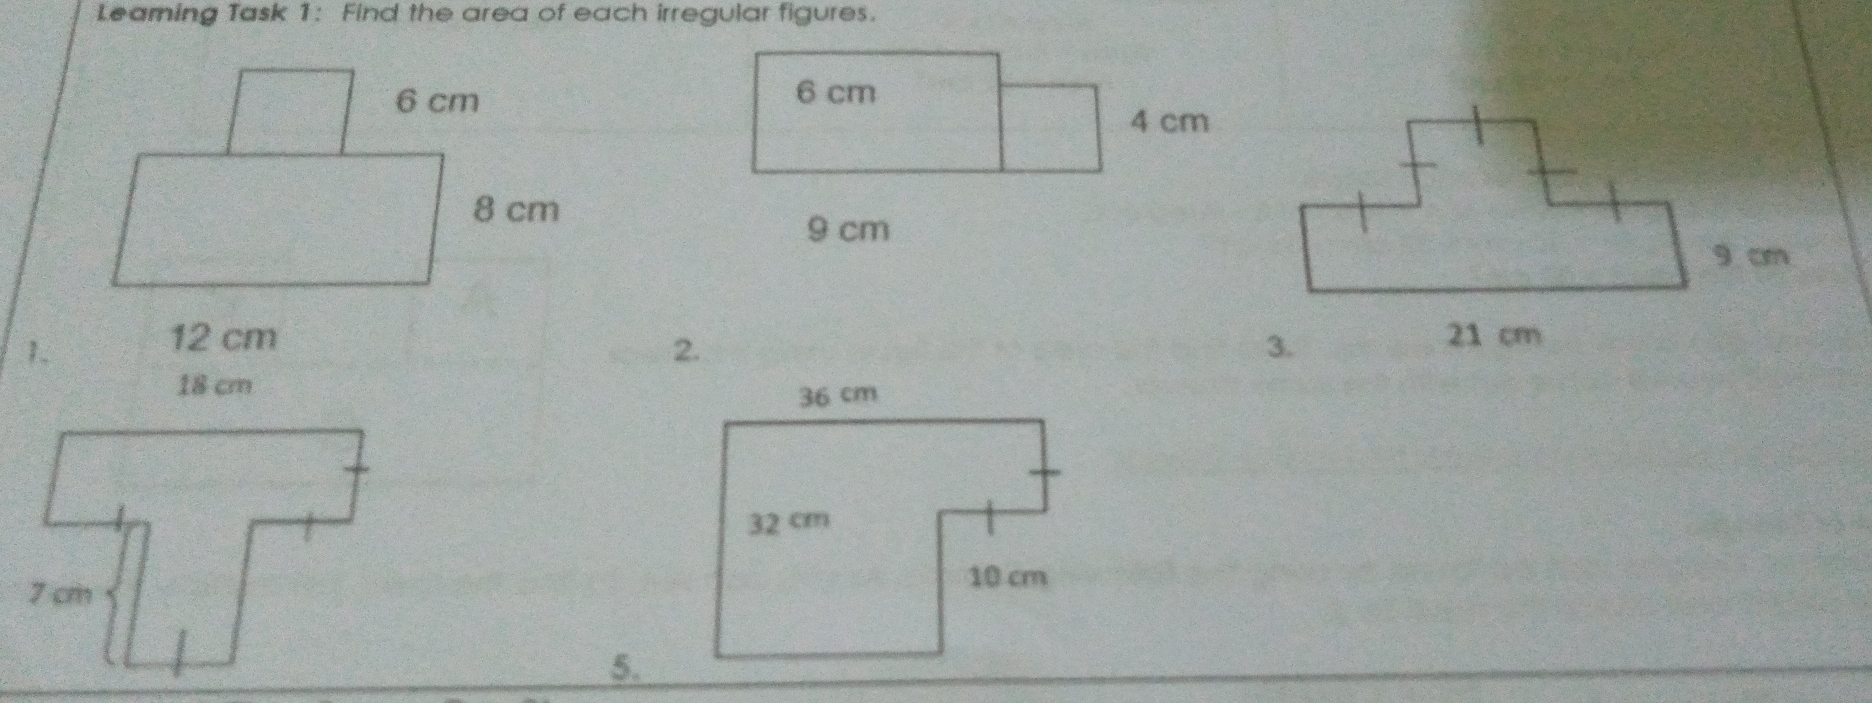 Leaming Task 1: Find the area of each irregular figures. 6 cm 6 cm 4 cm 8 cm 9 cm 9 cm 1. 12 cm 21 cm 2. 3. 18 cm 36 cm 32 cm 7 cm 10 cm 5.